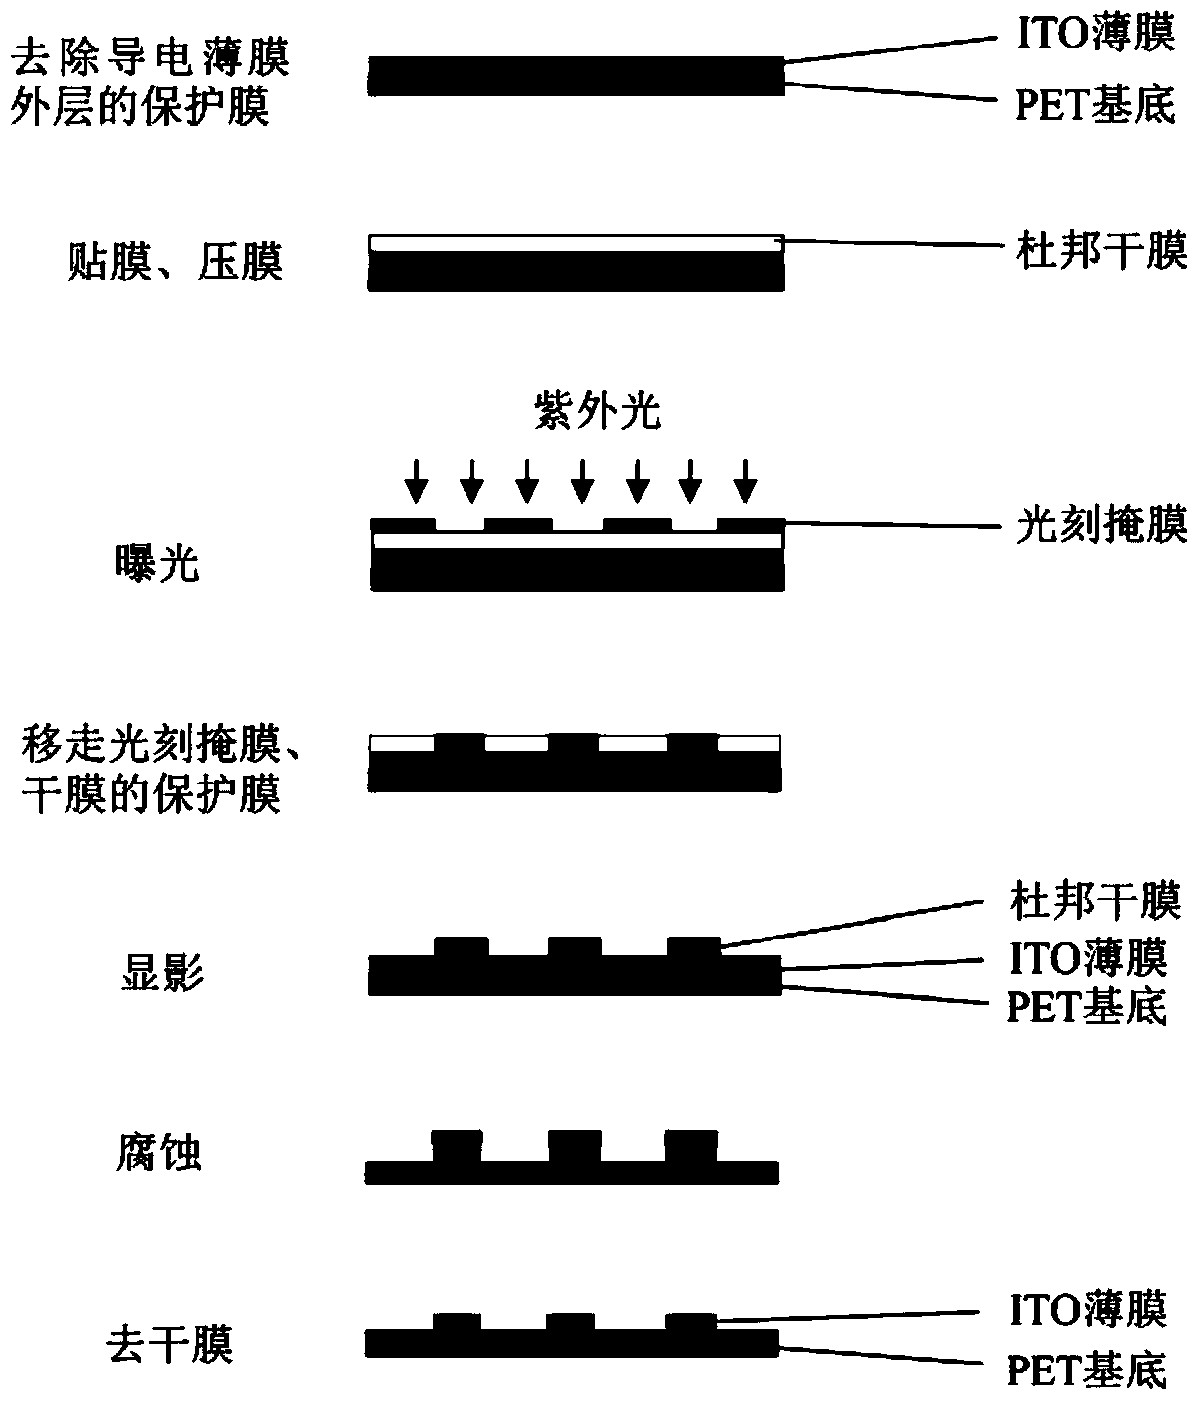 Fabrication of the detection electrode of the microfluidic chip and its electrophoretic non-contact conductivity detection system